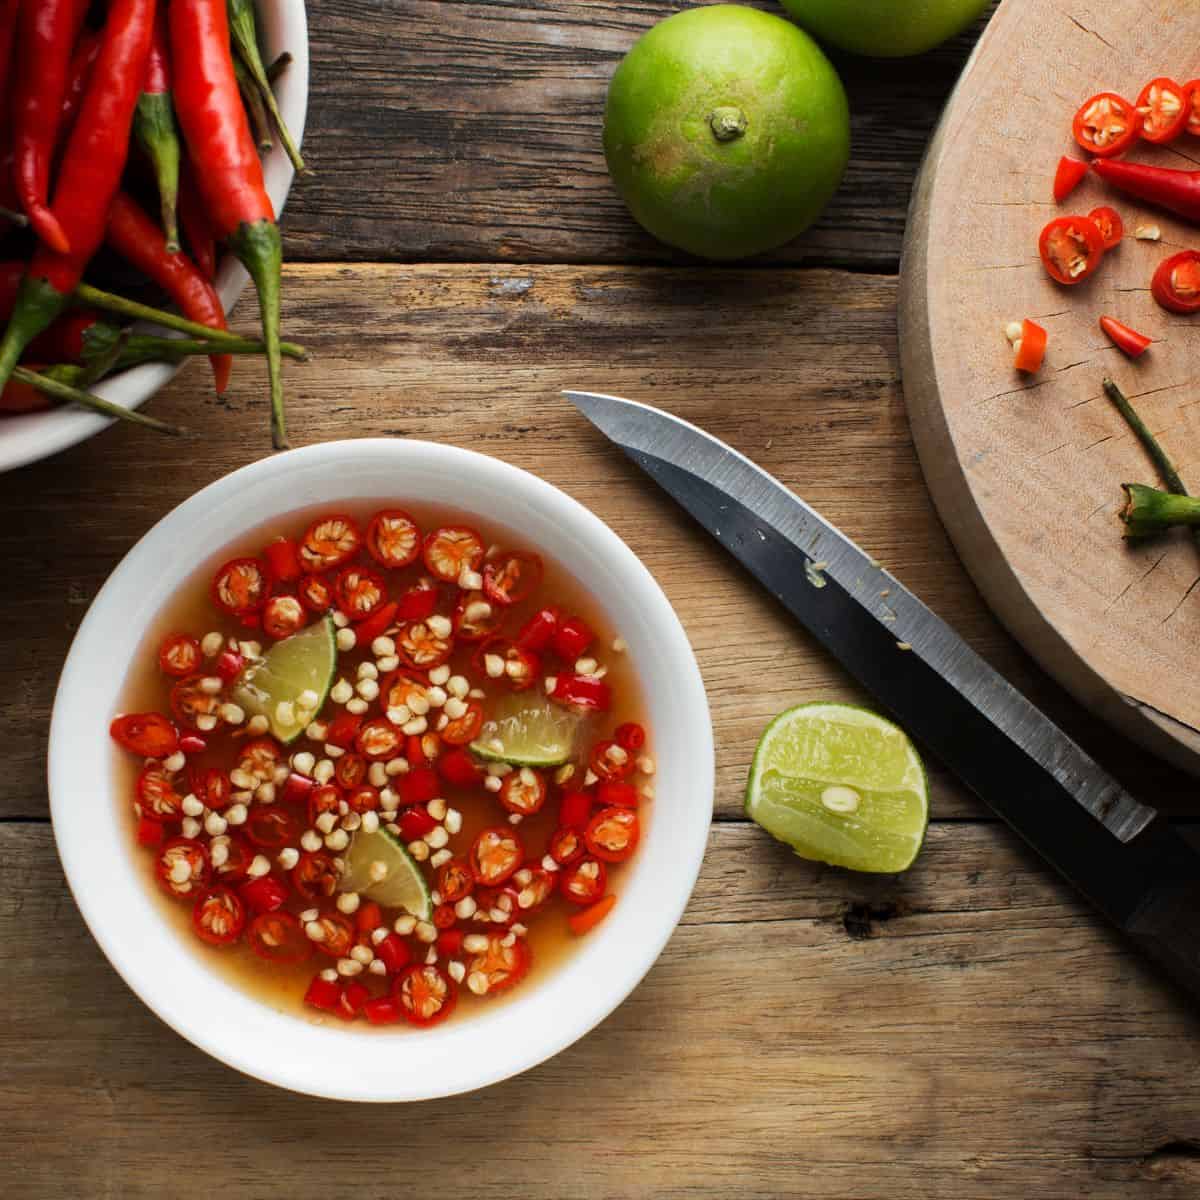 A small white bowl is filled with fish sauce, chilis, and pieces of lime. Chilis and limes and seen next to a cutting board with a knife.